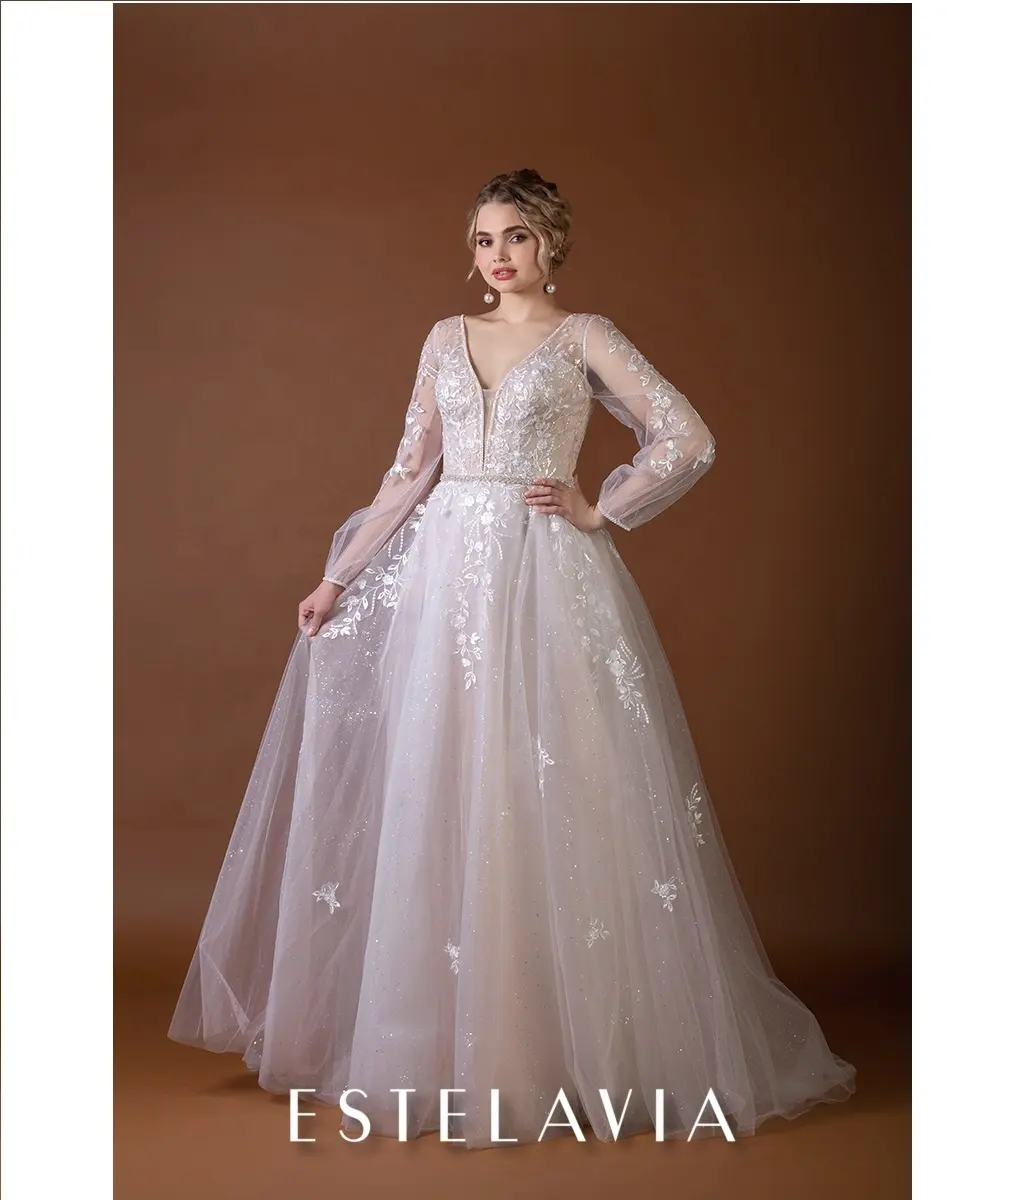 Estelavia "Donna" White Modern Lace Long Sleeve Wedding Dress with V-neck and A-line Three Layer Skirt